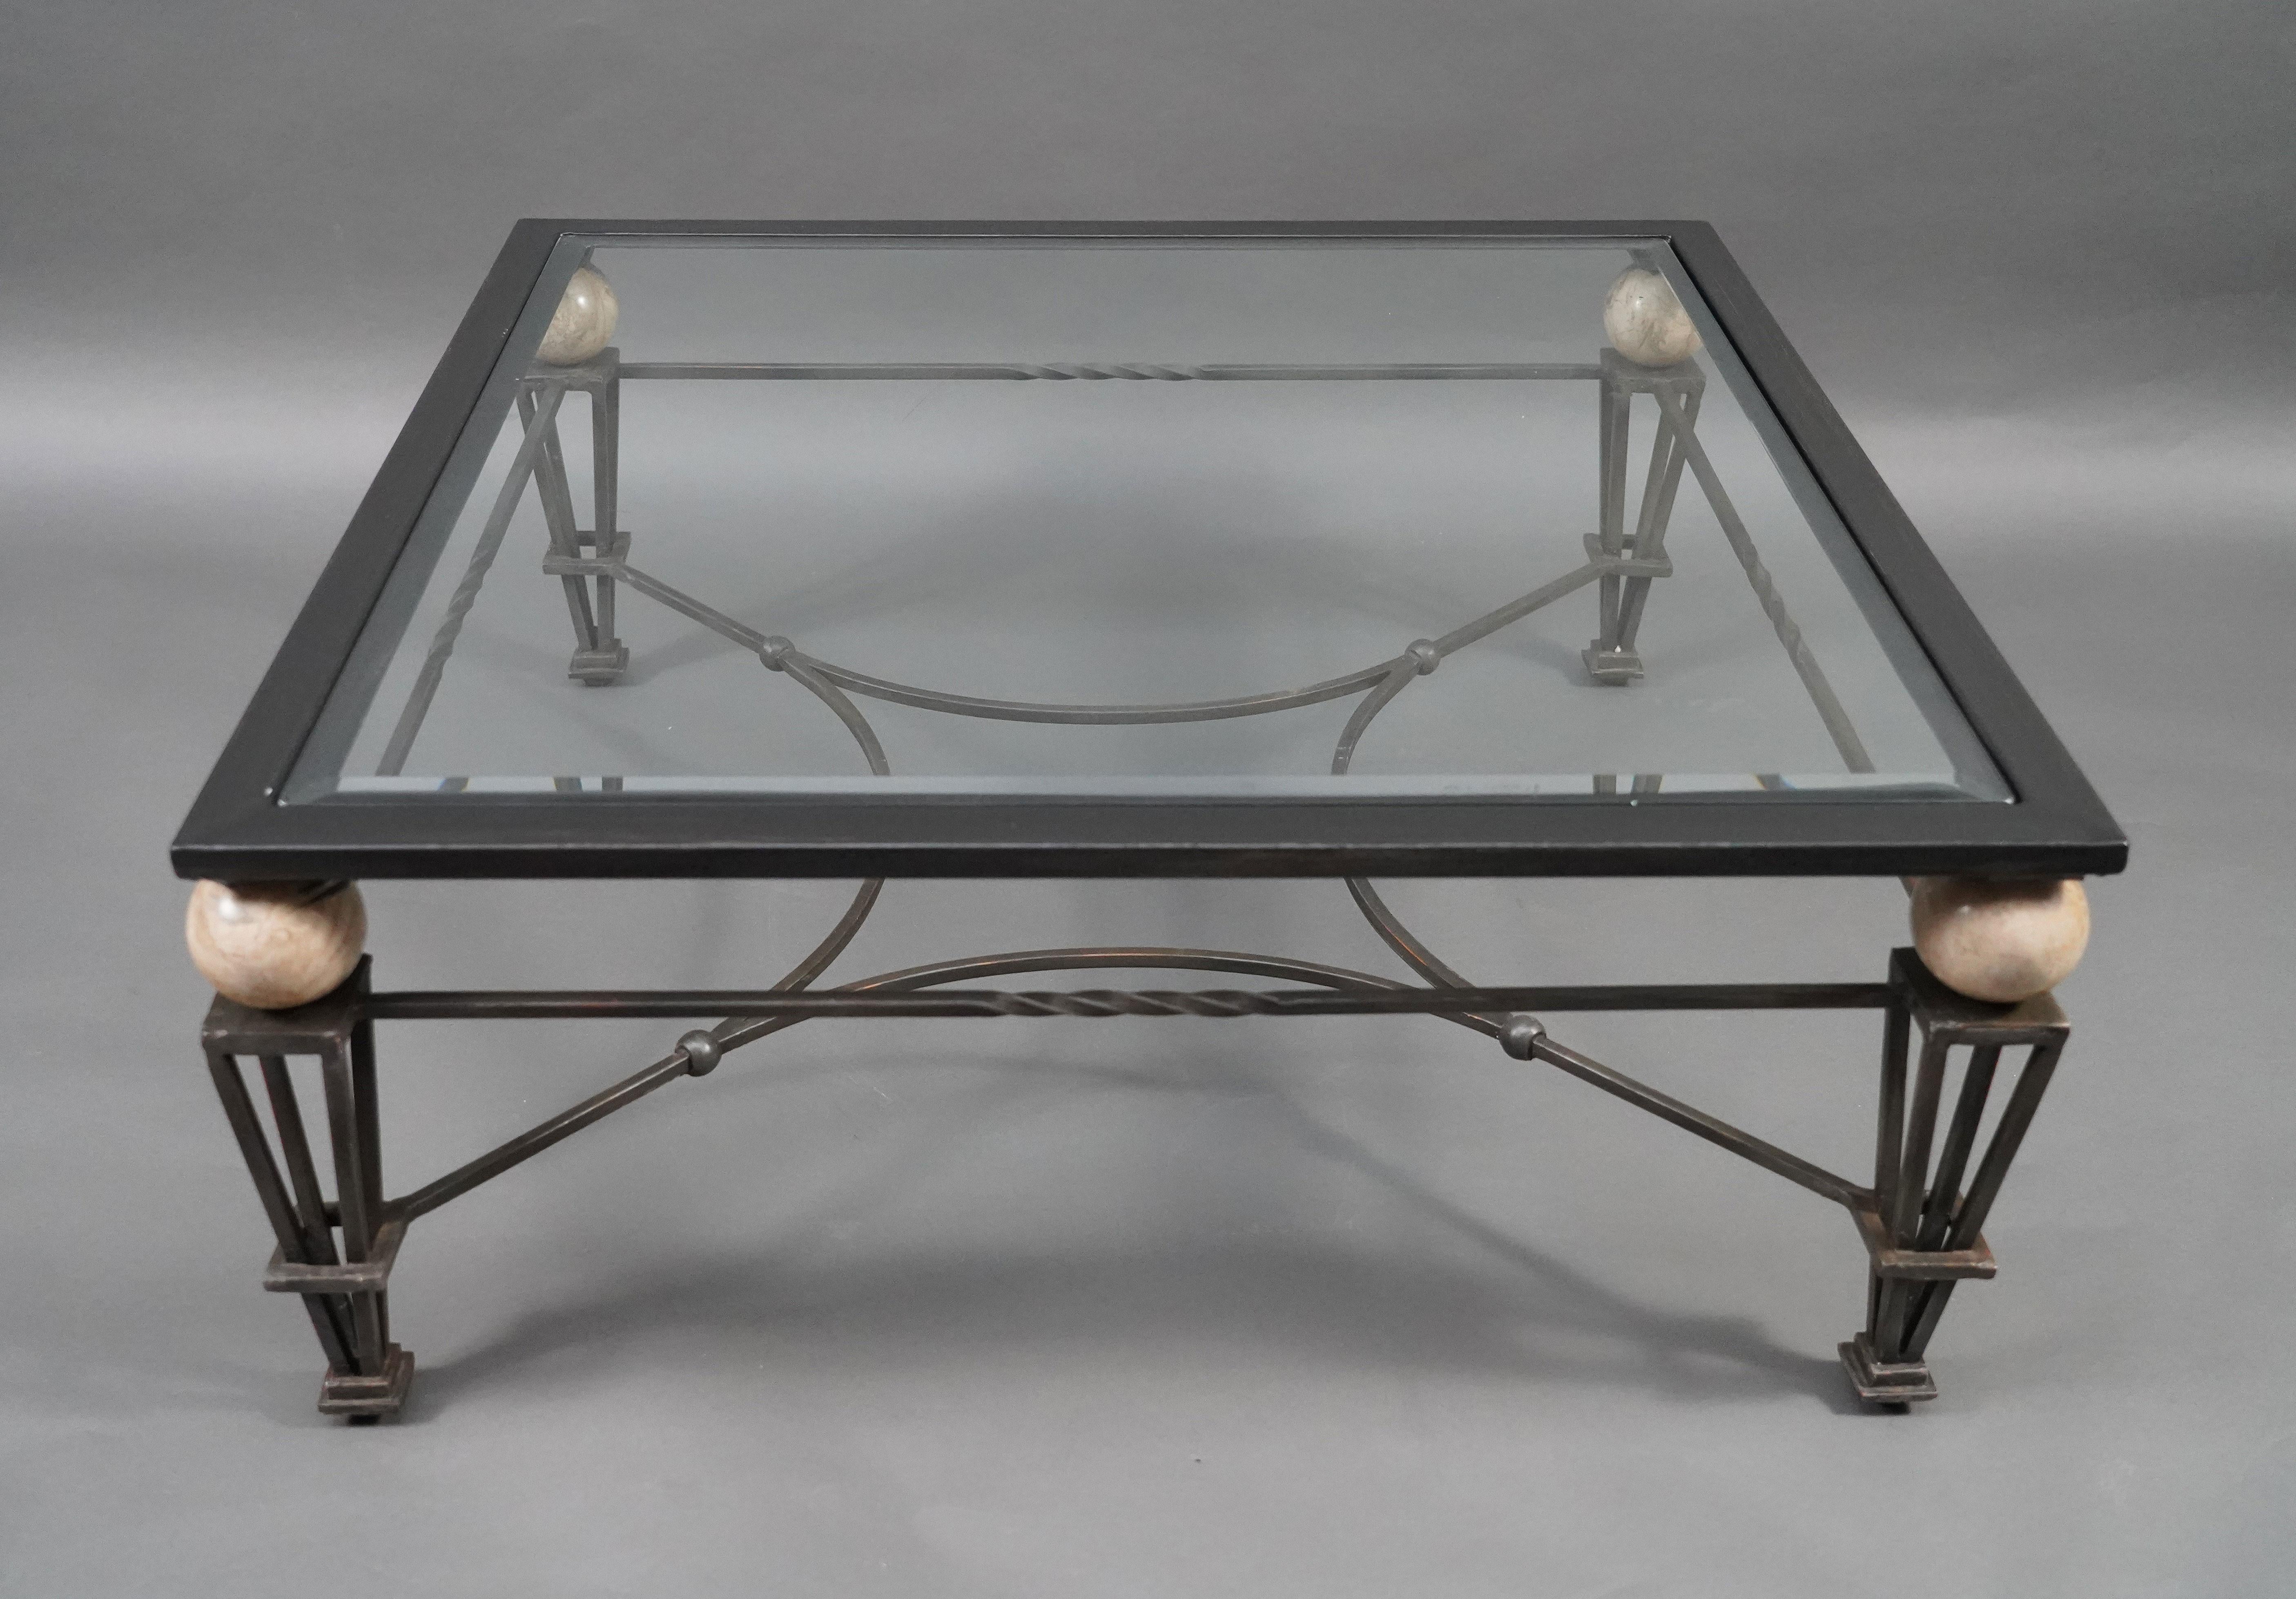 Beautiful patinated iron coffee table. The square beveled glass top rests on four marble balls ending in four openwork sheathed feet, connected by a spacer.

Biographie :
Roche Bobois is the story of how the managers of two stores met in the 1960s